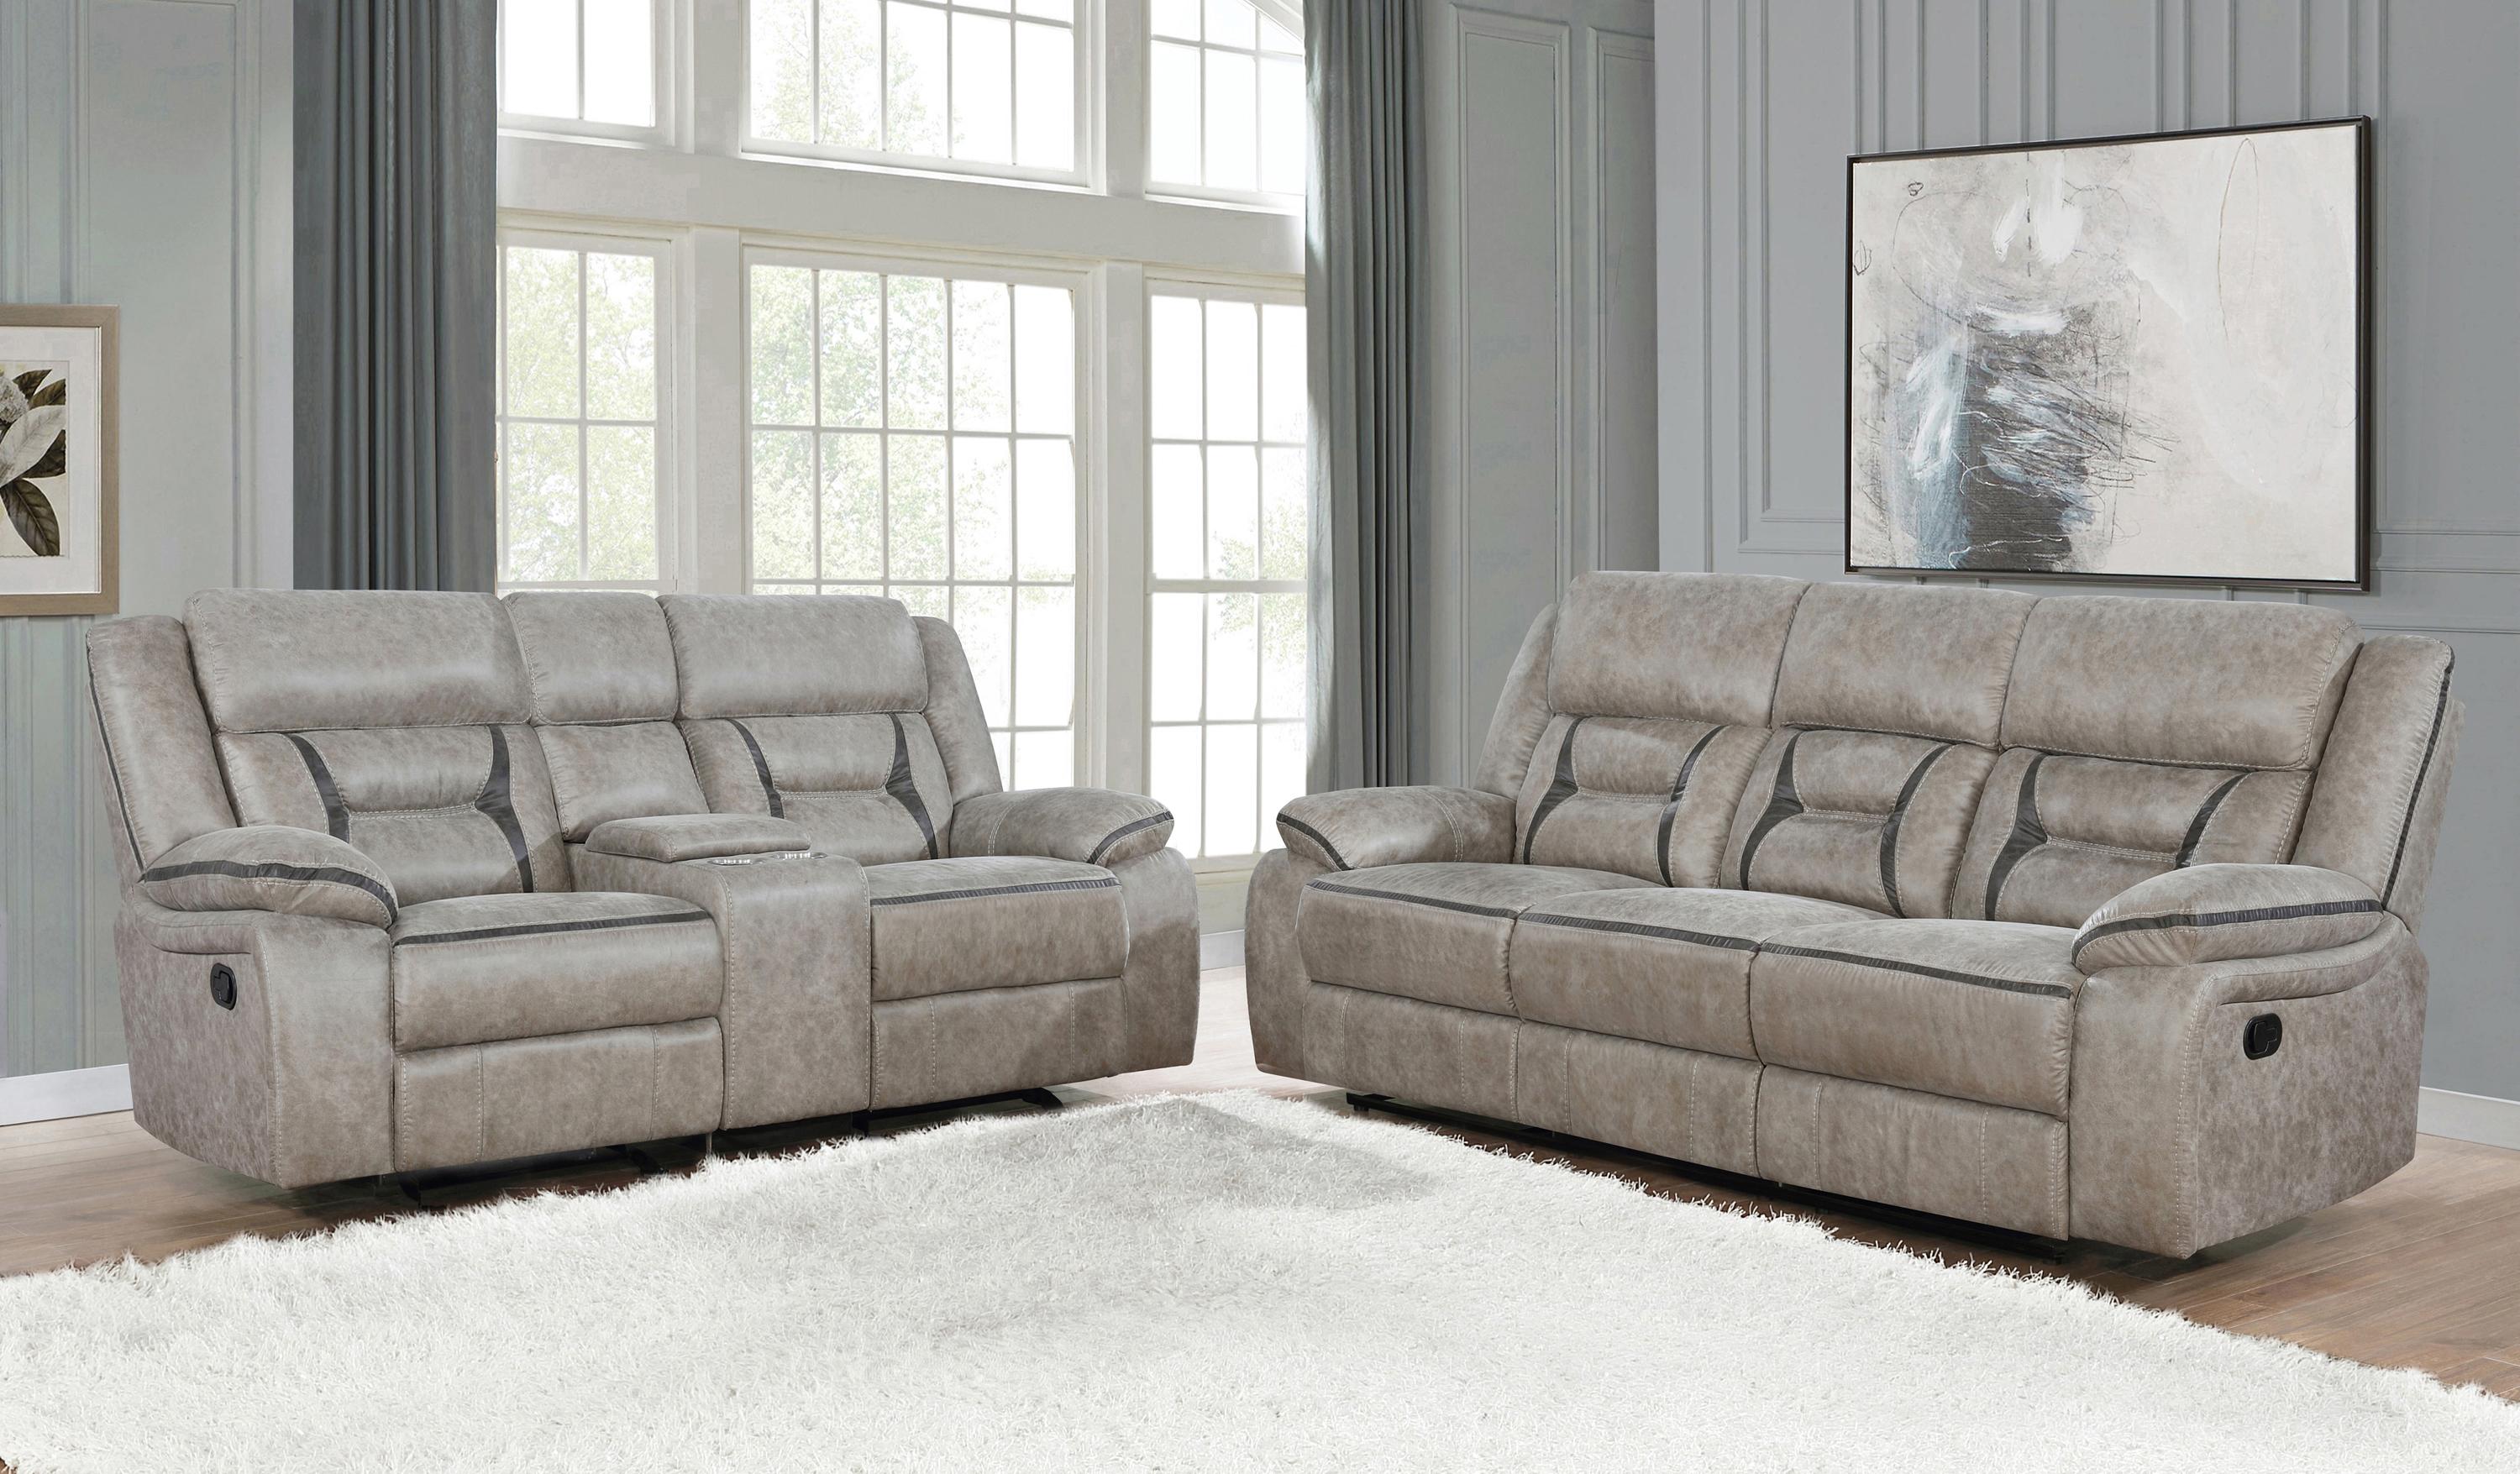 Transitional Living Room Set 651351-S2 Greer 651351-S2 in Taupe Leatherette